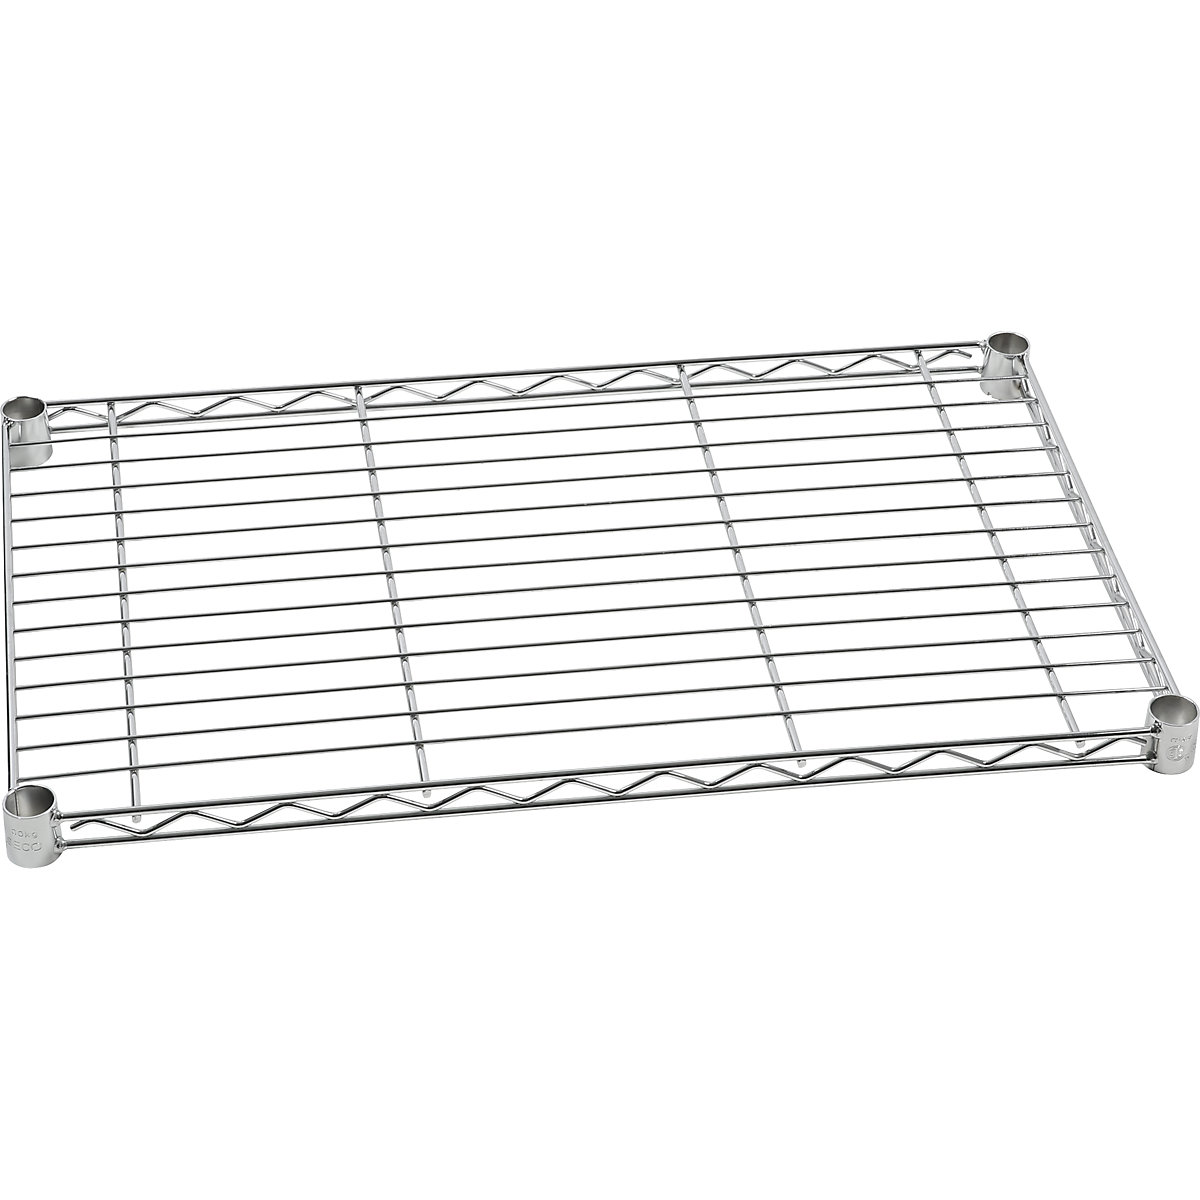 Shelf for wire mesh table trolley